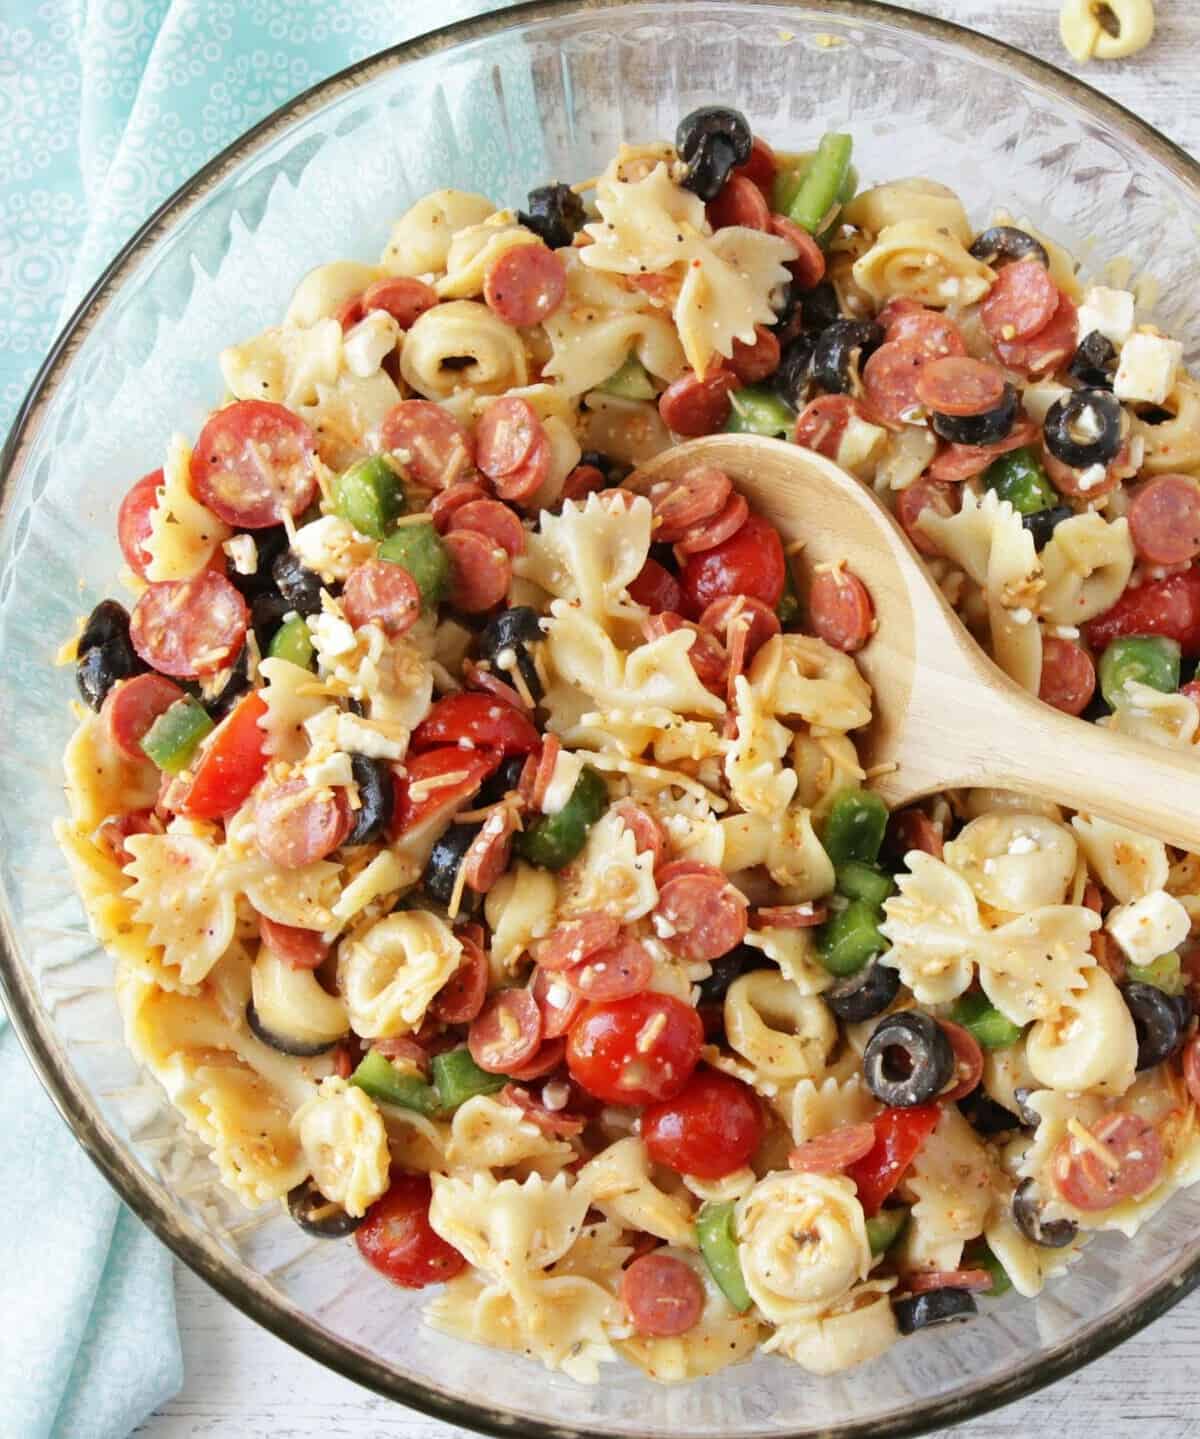  This tortellini and bow tie pasta salad is a feast for the eyes and the taste buds.